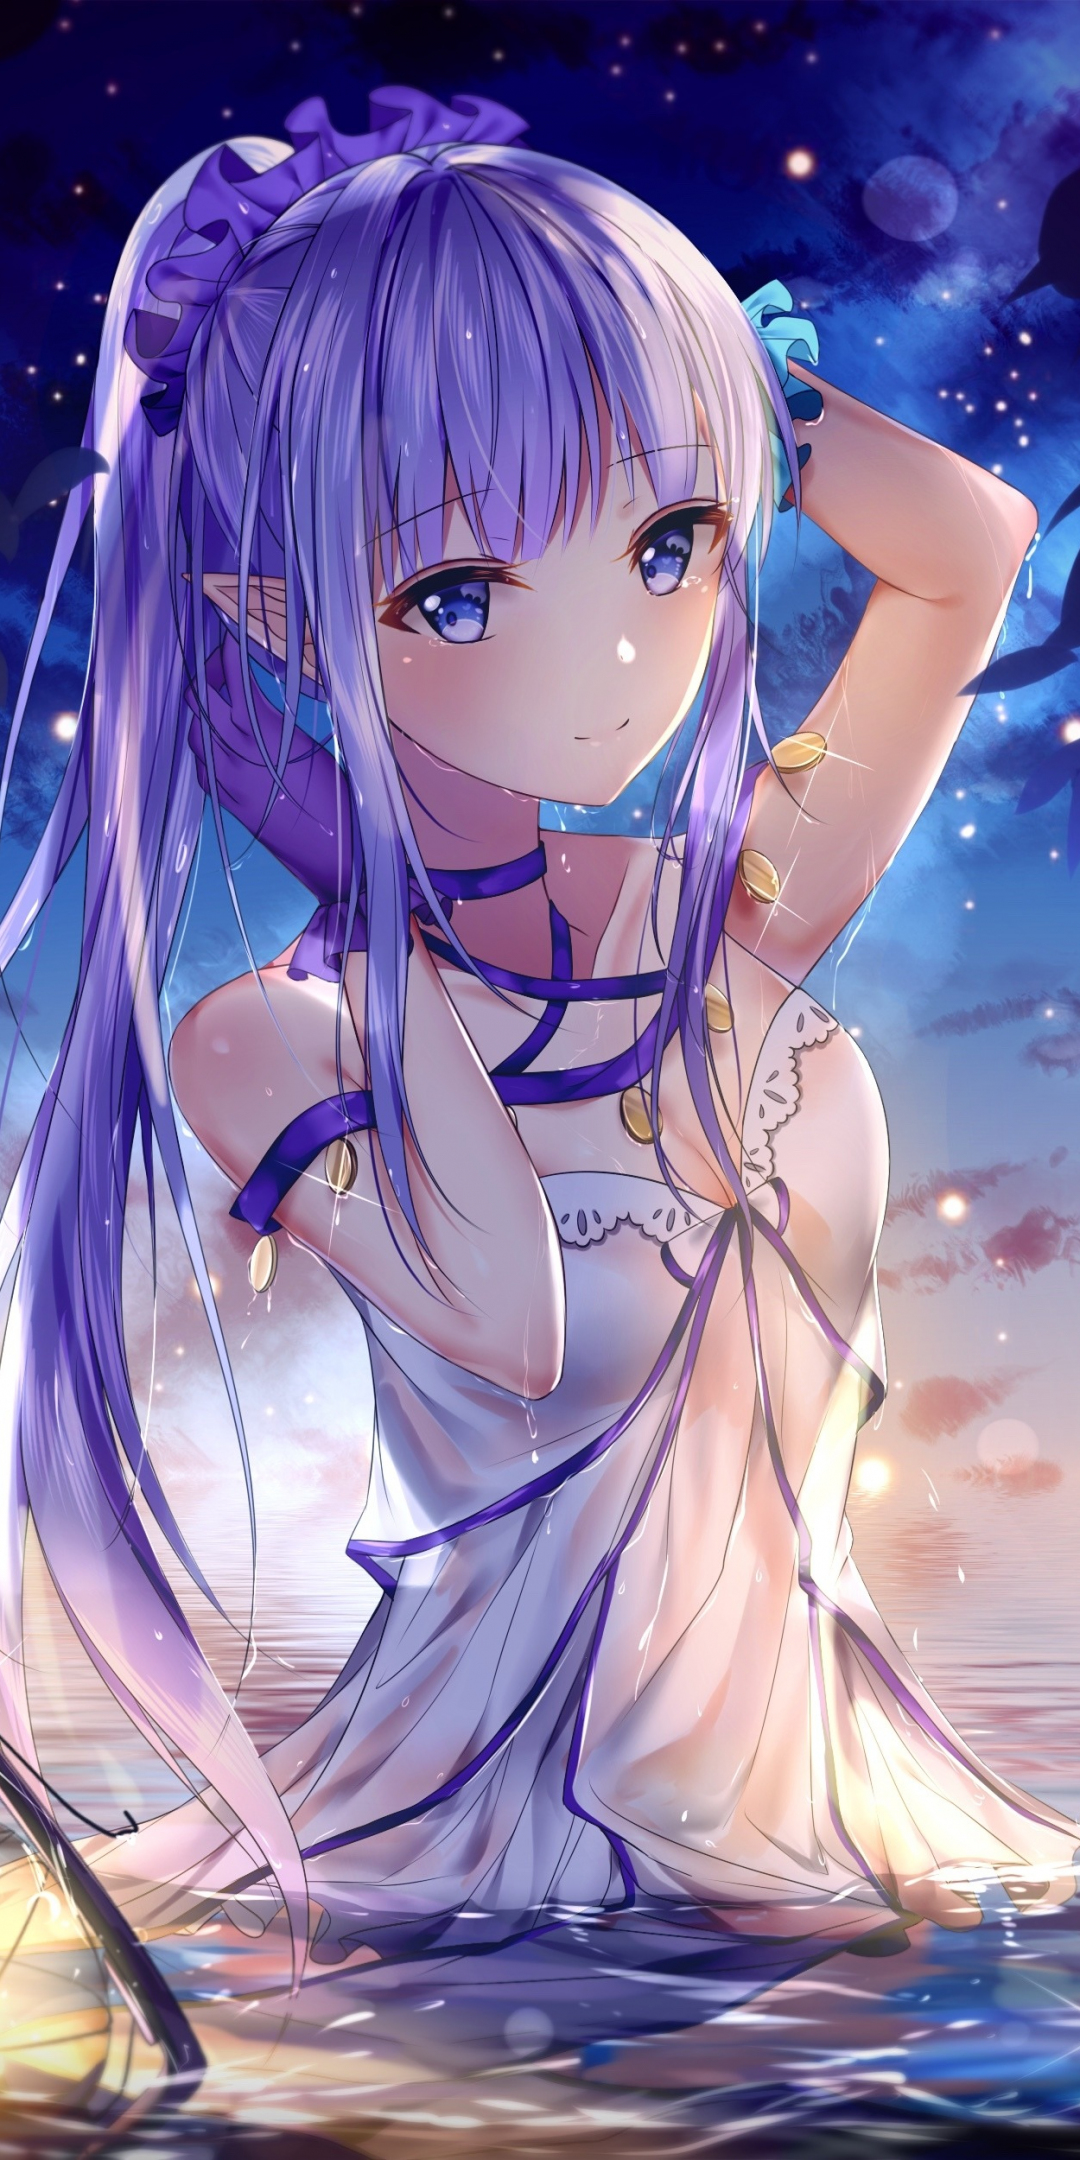 Fate/Stay Night, Fate series, anime girl, wet body, 1080x2160 wallpaper